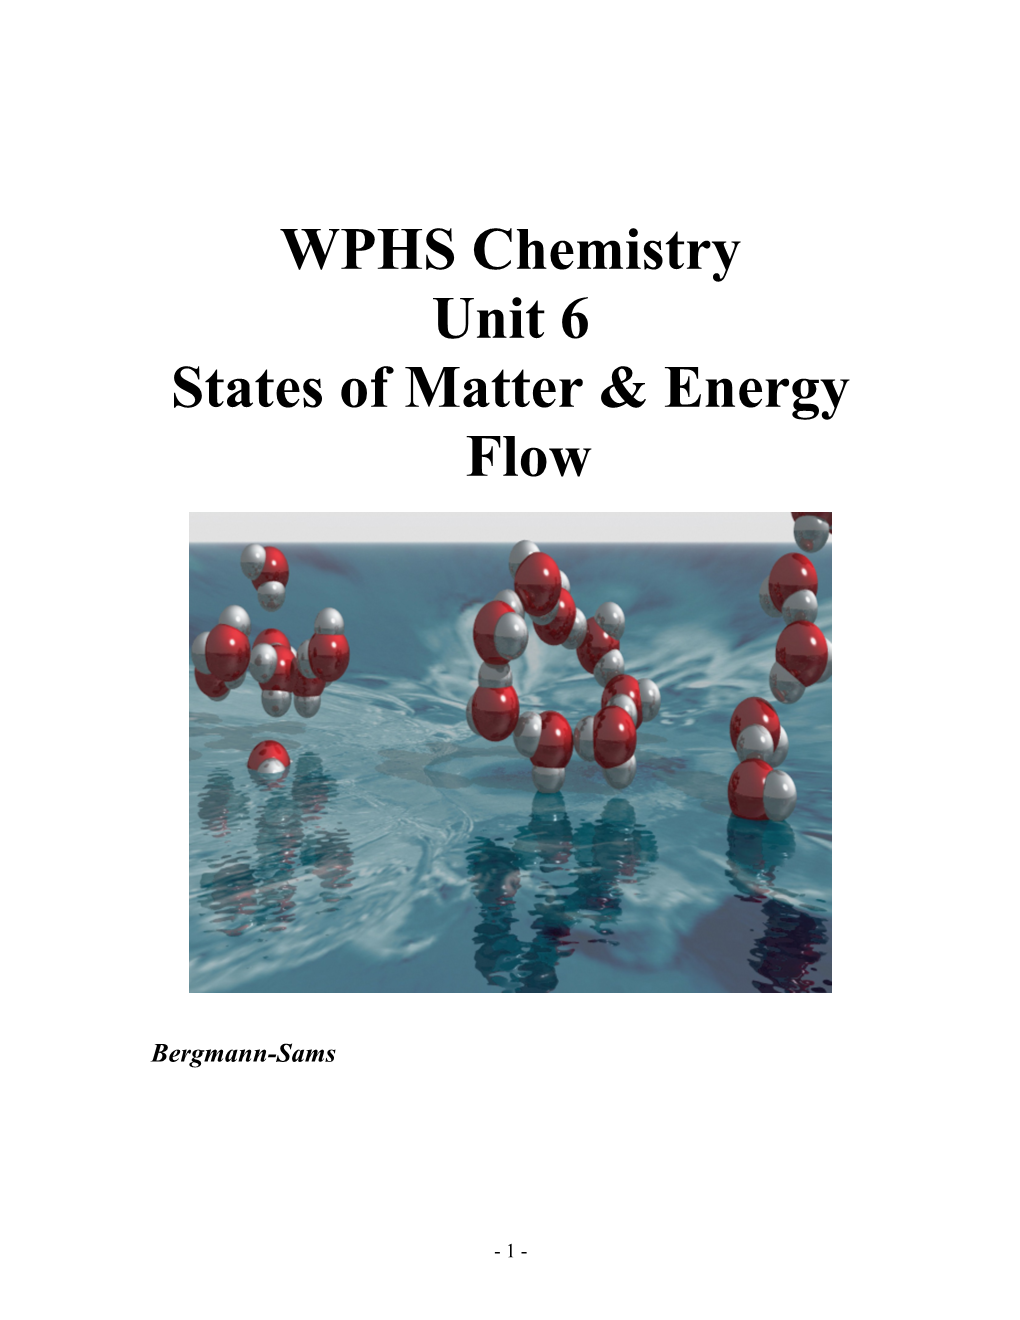 States of Matter & Energy Flow